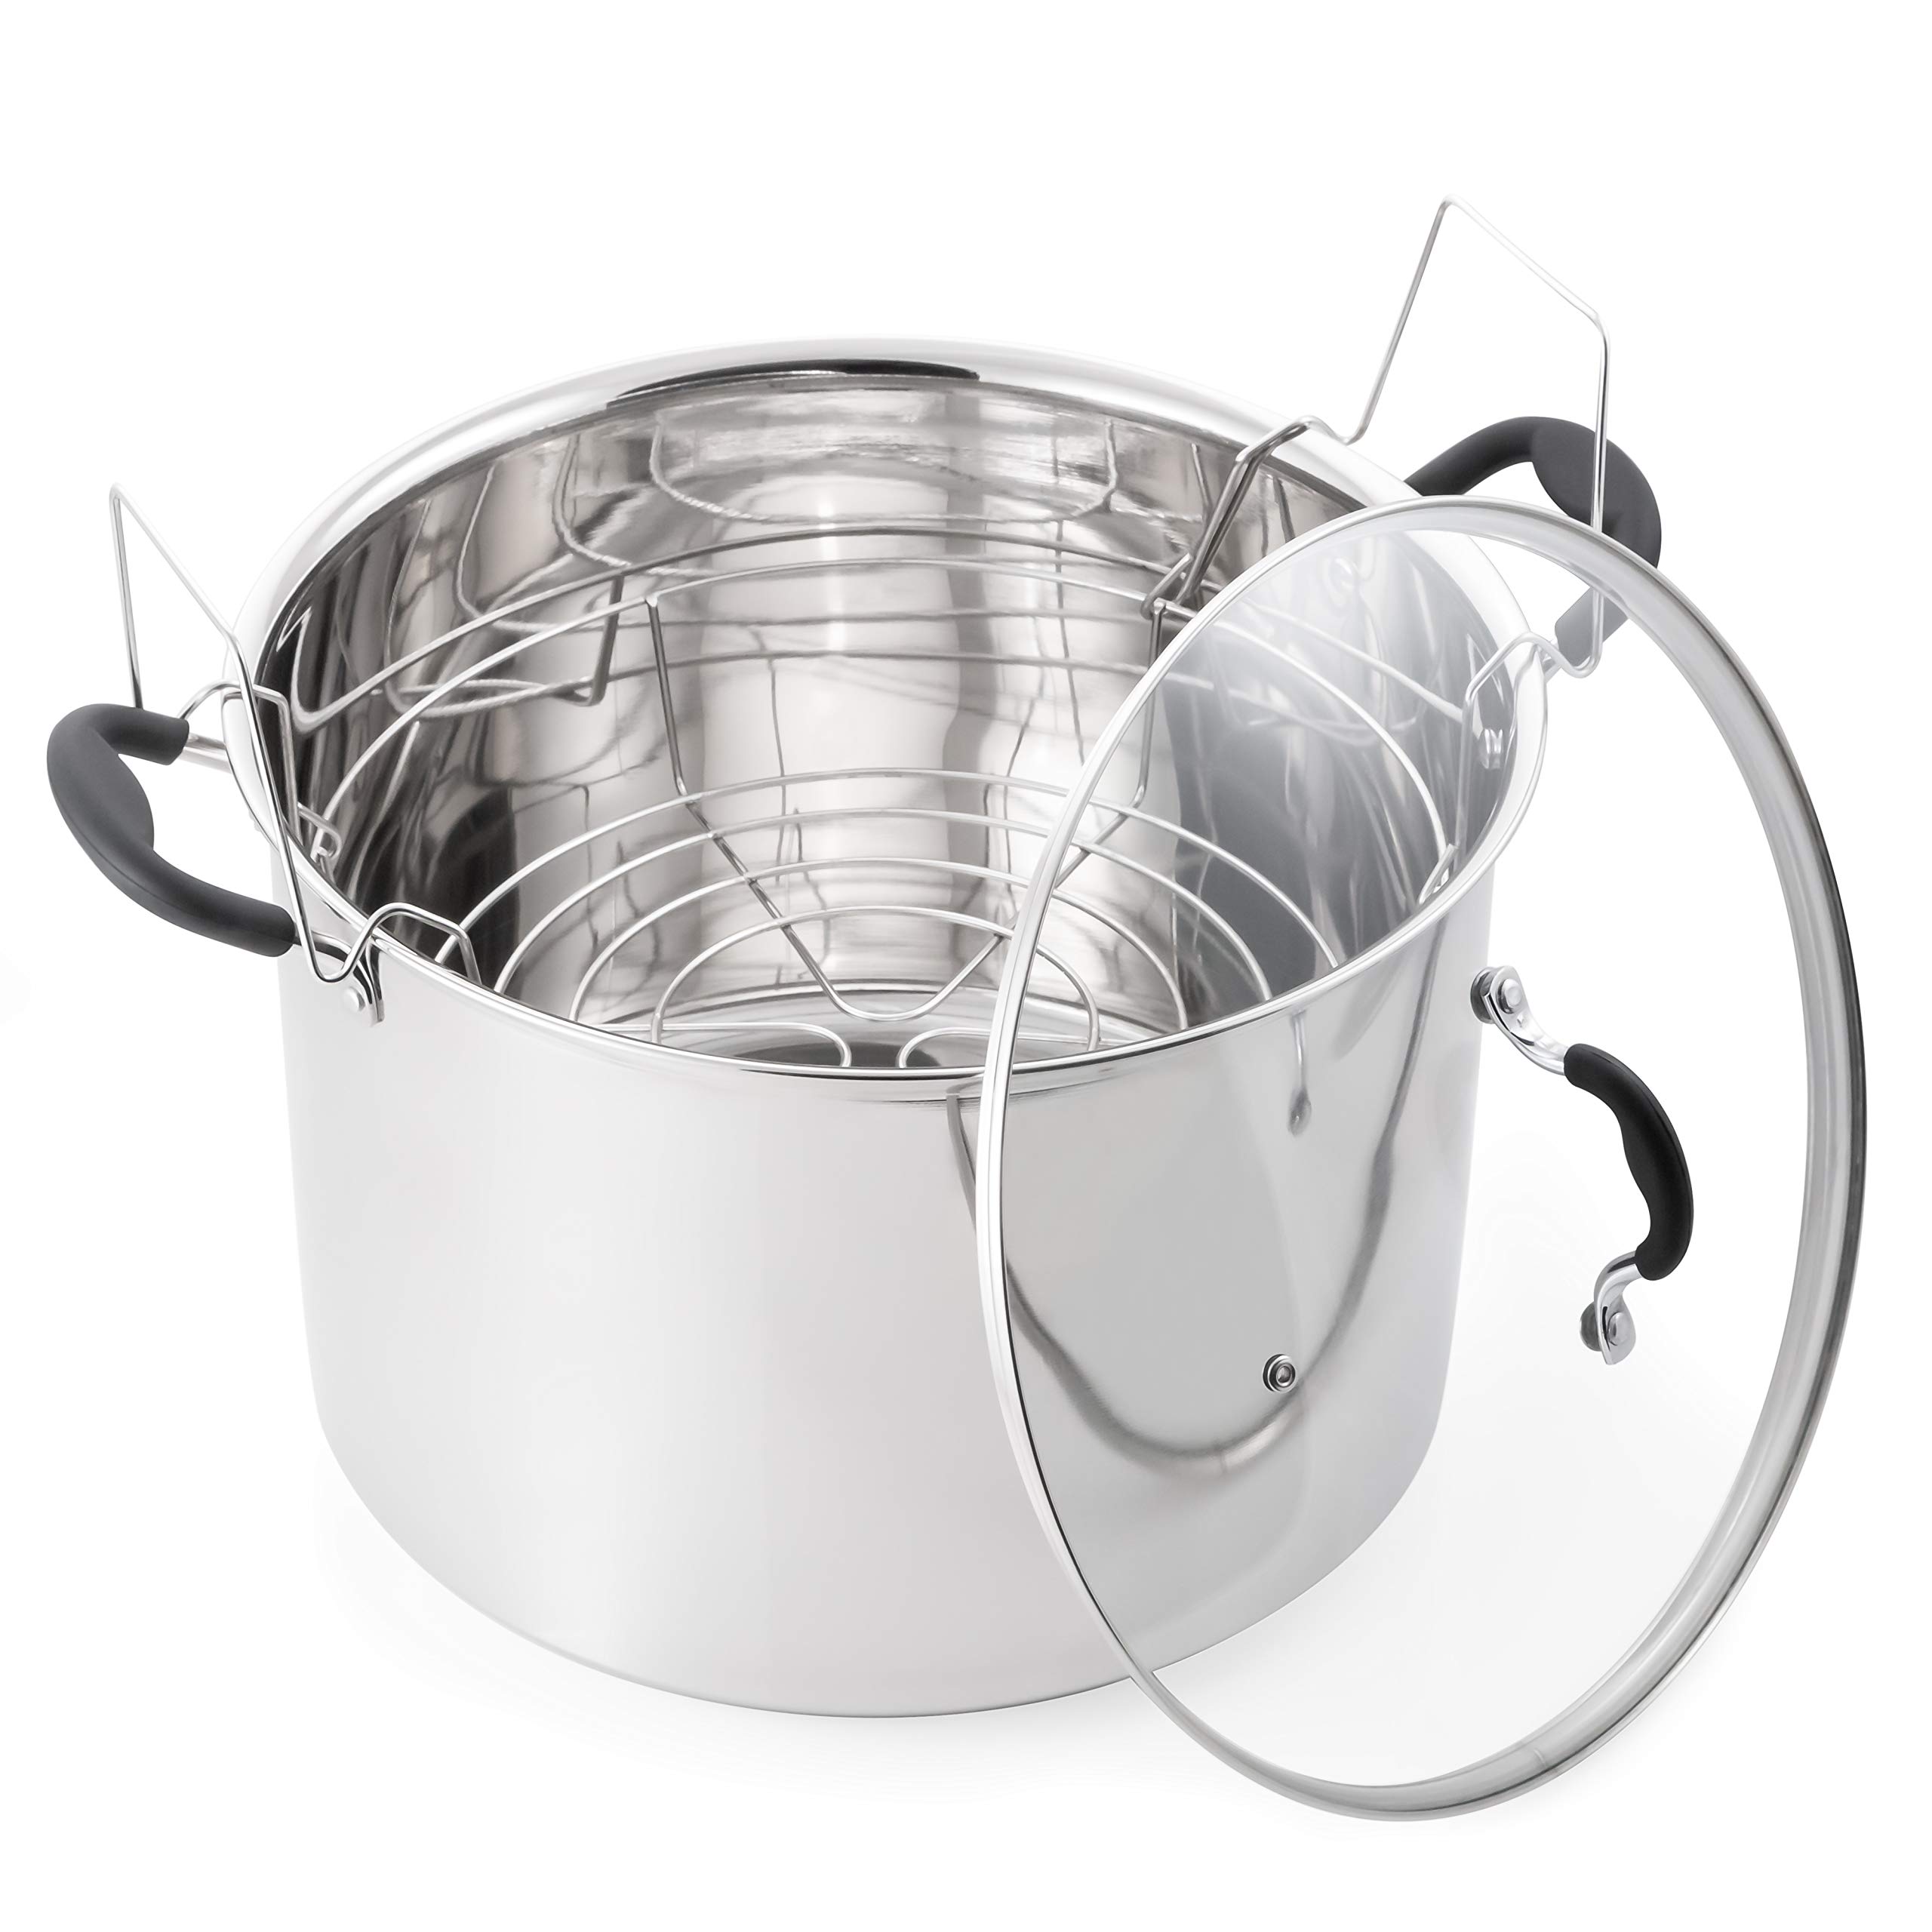 McSunley Water Bath Canner